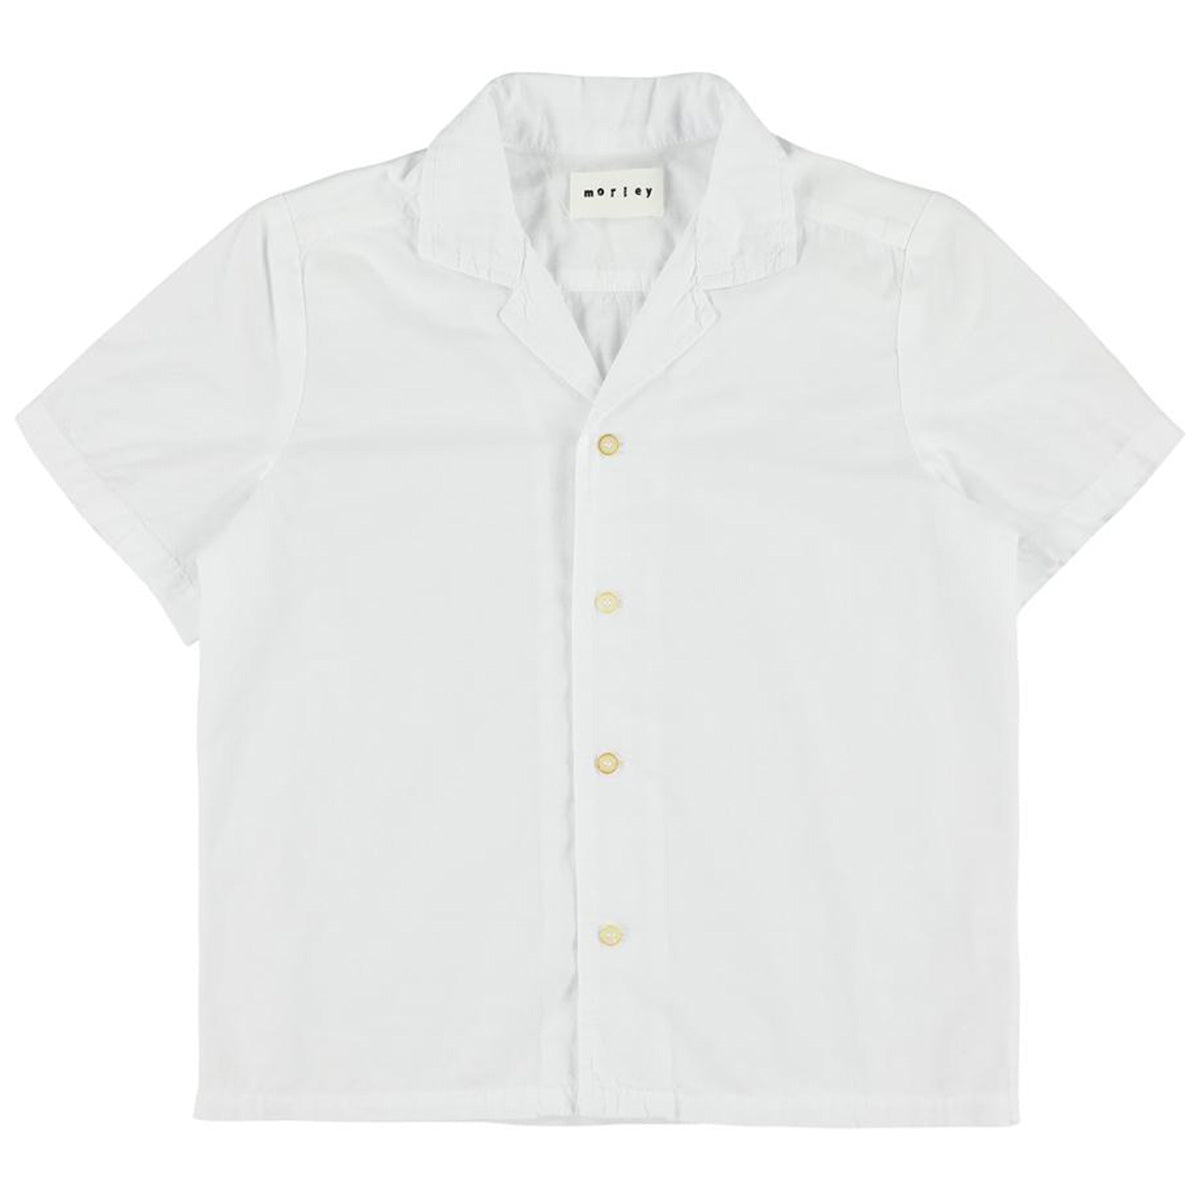 The Sault Shirt from Morley. A regular fit and button up design featuring short sleeves and a classic collared top.